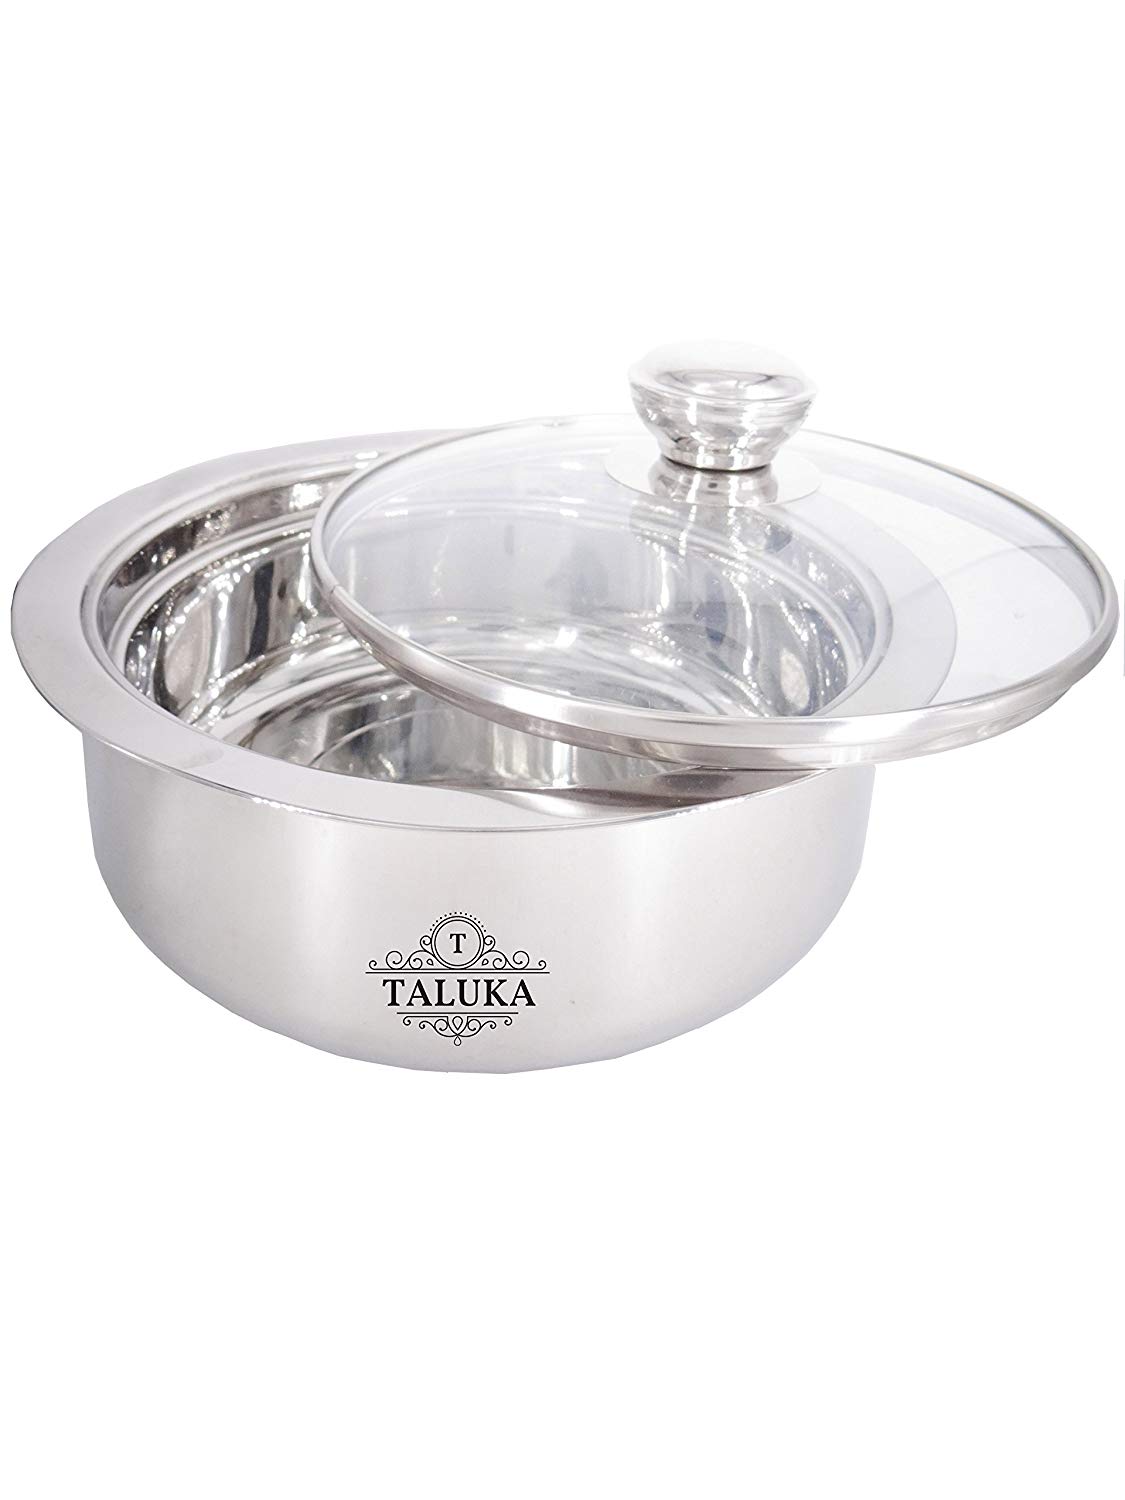 Stainless Steel Insulated Chapati Casserole Box With Glass Lid Serving Casserole